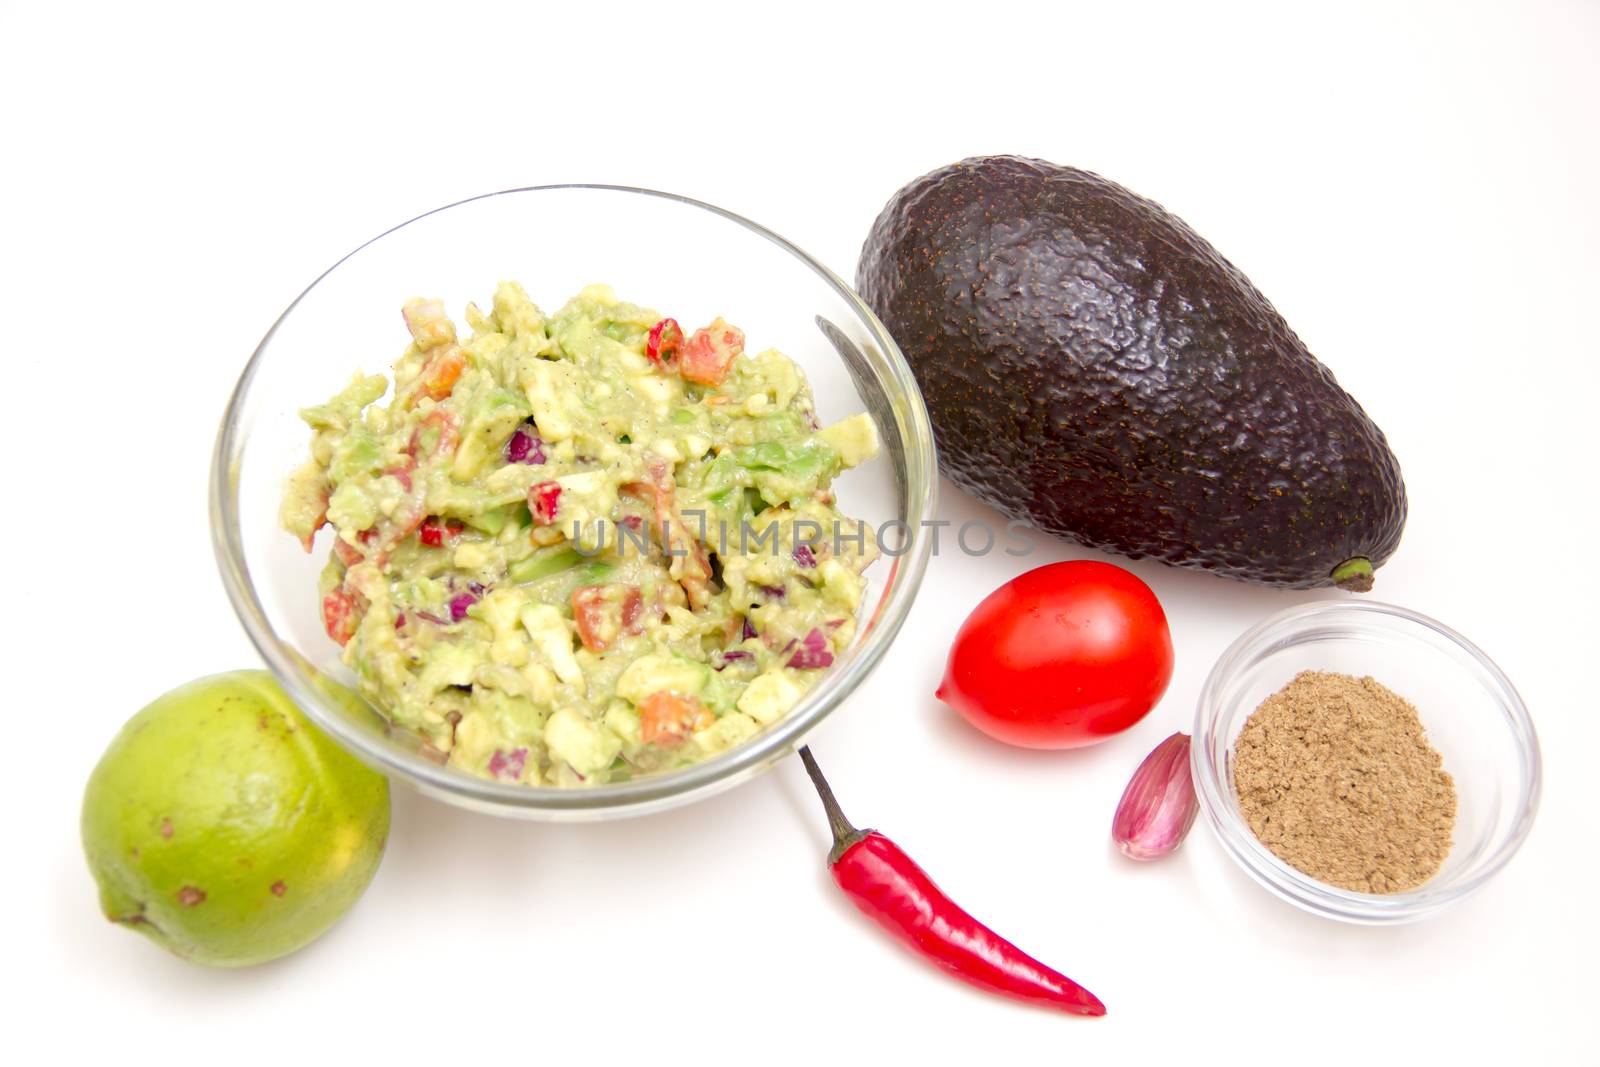 Guacamole ingredients by spafra